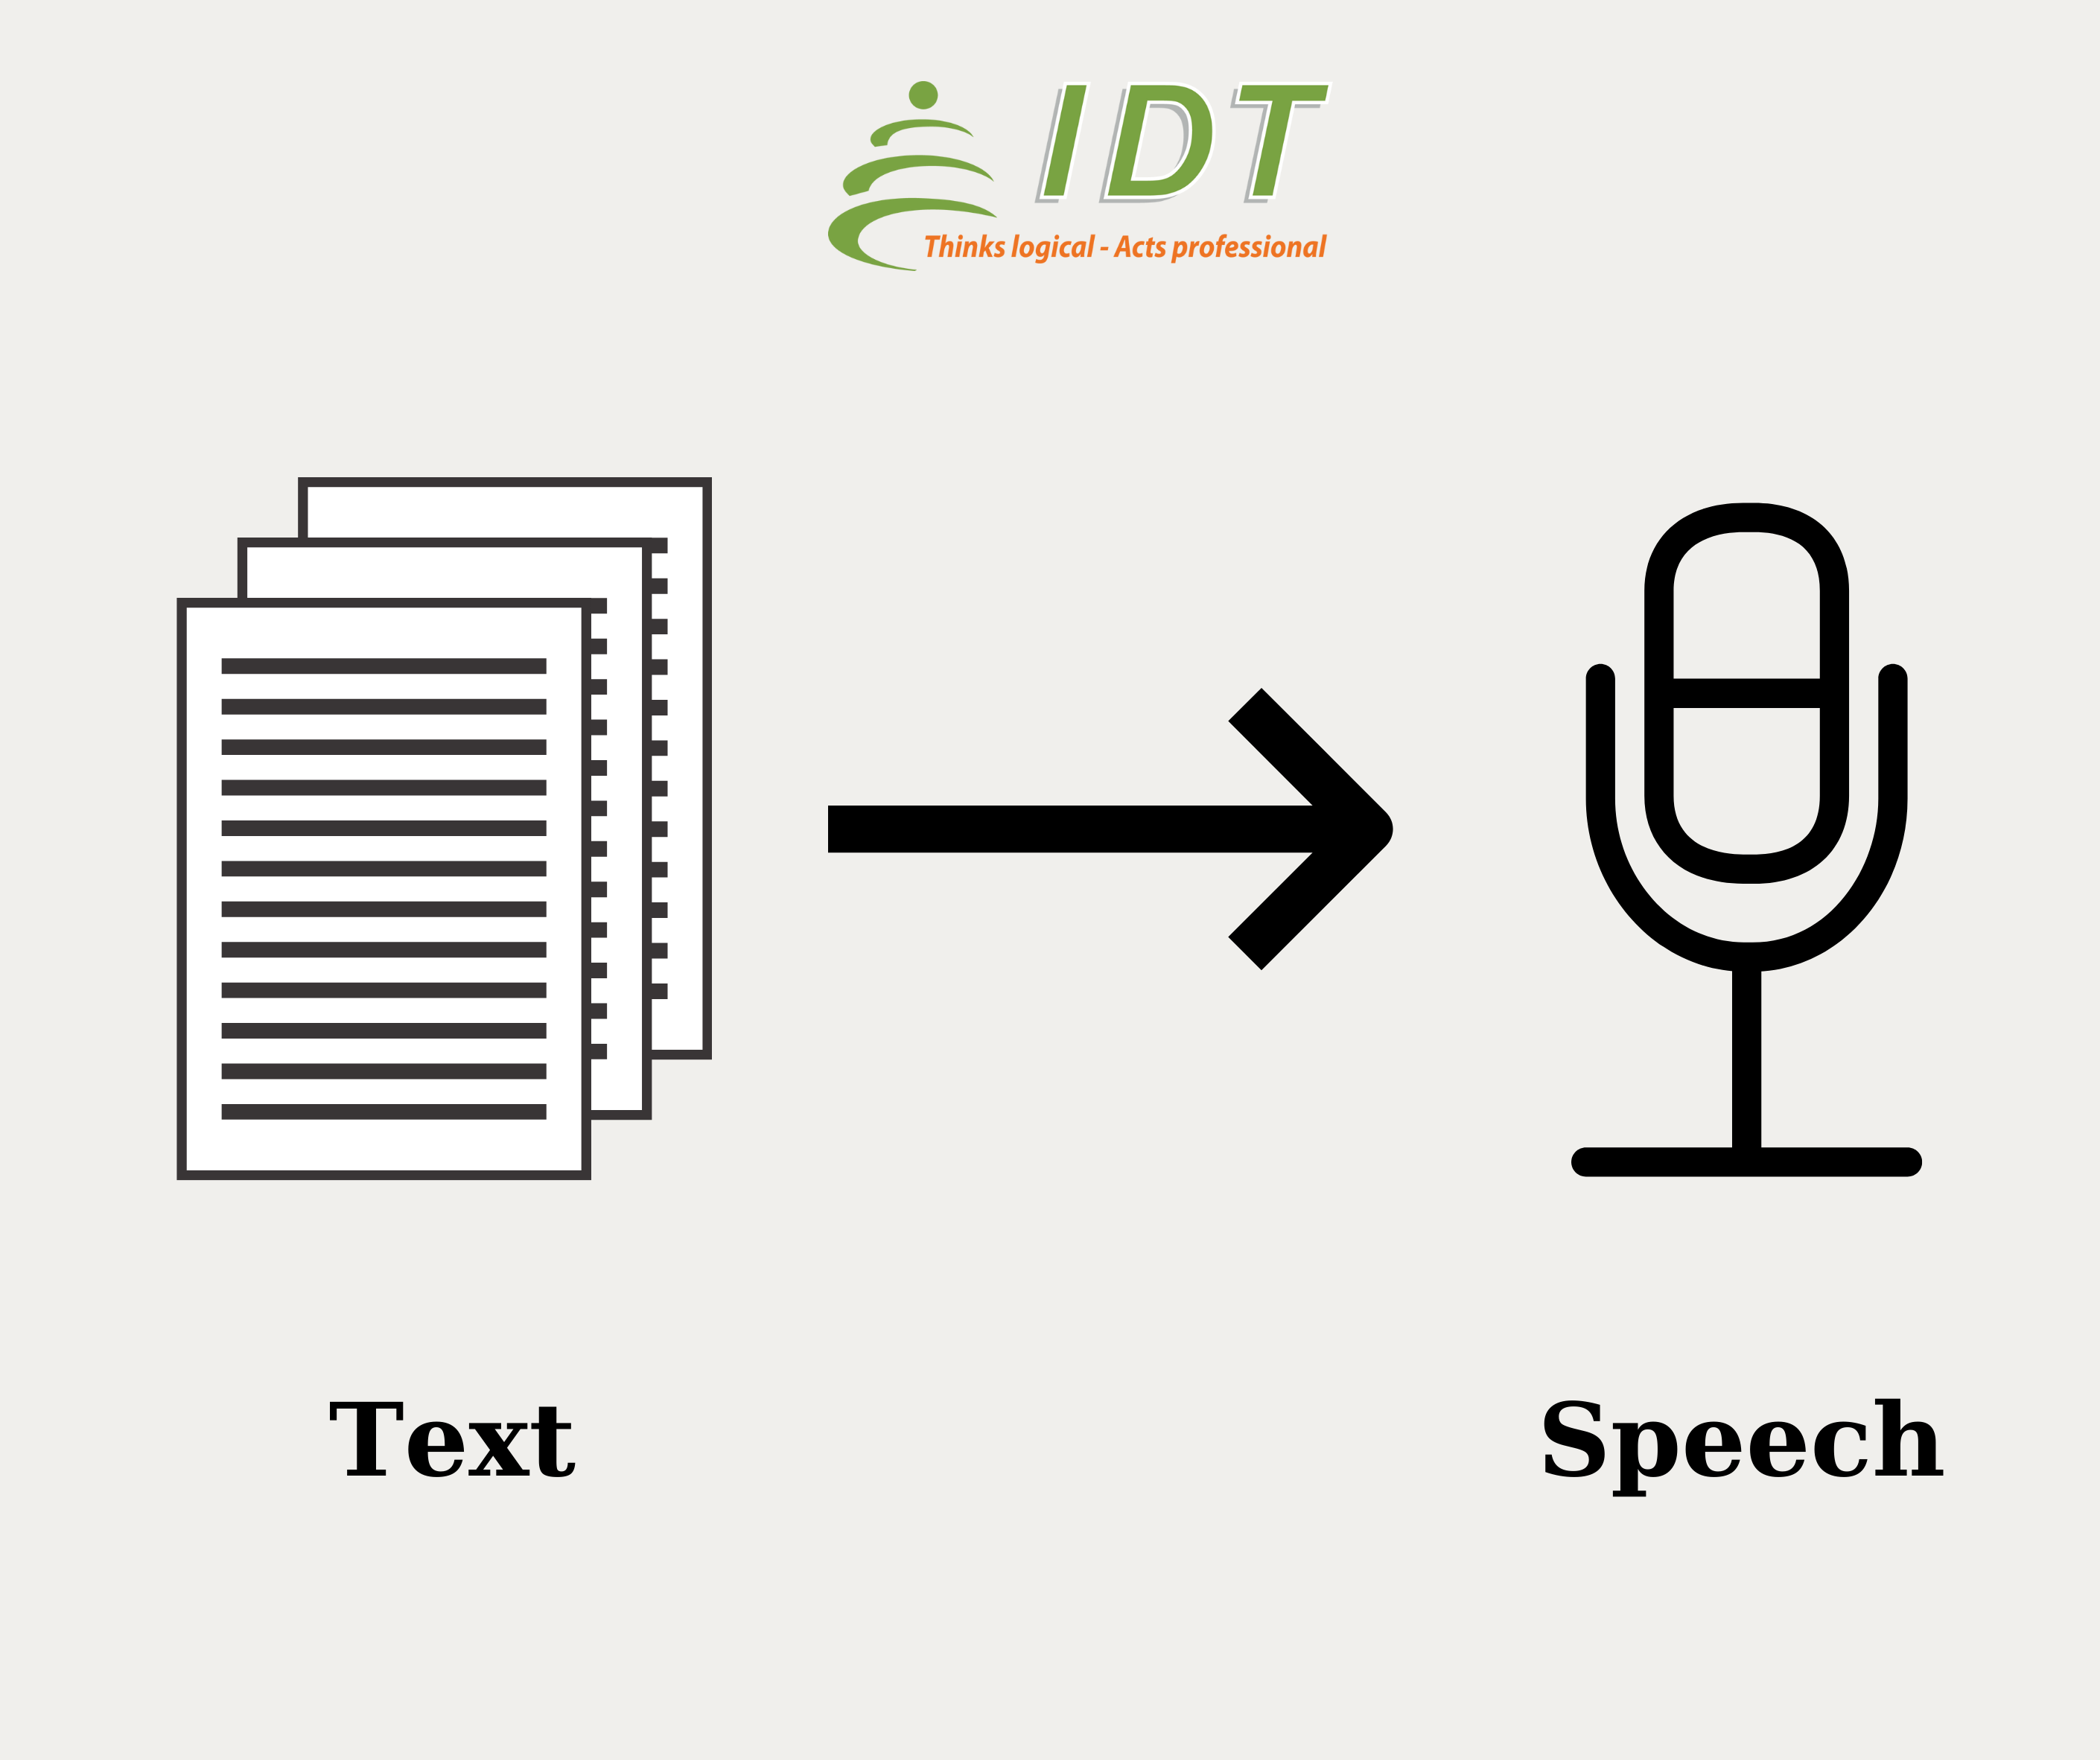 text to speech in funny voices